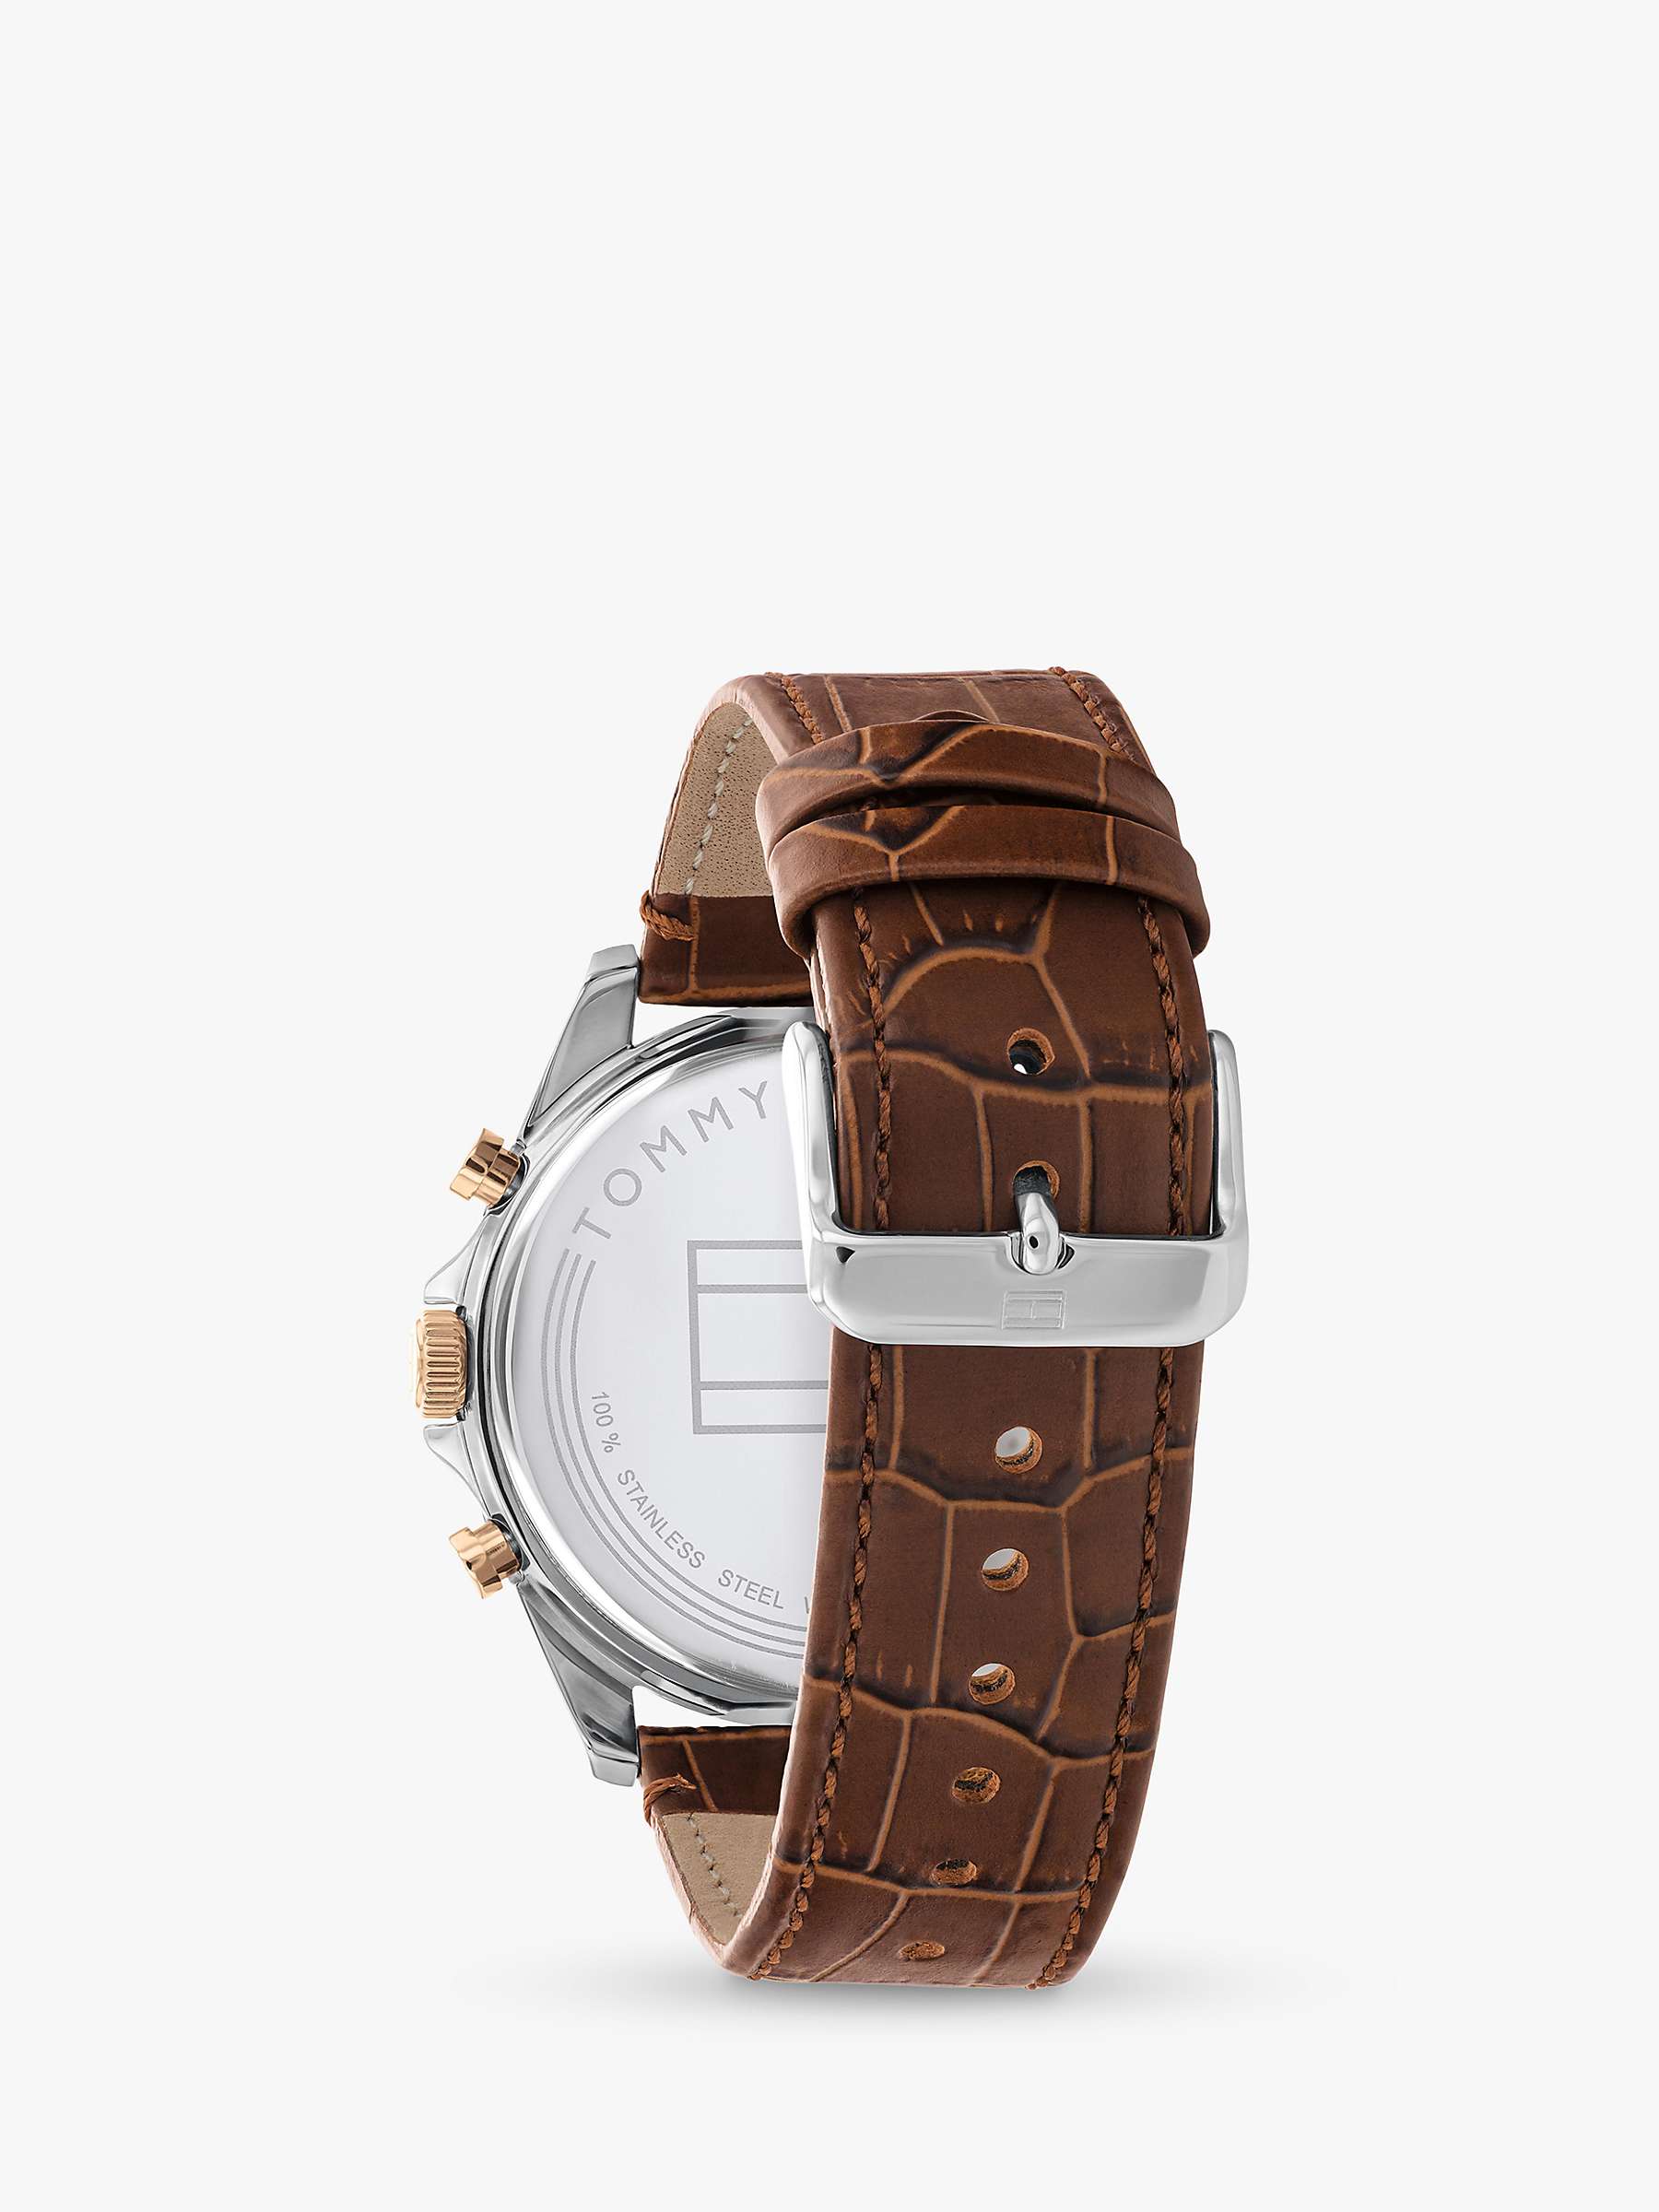 Buy Tommy Hilfiger Men's Baker Day Date Chronograph Heartbeat Leather Strap Watch Online at johnlewis.com